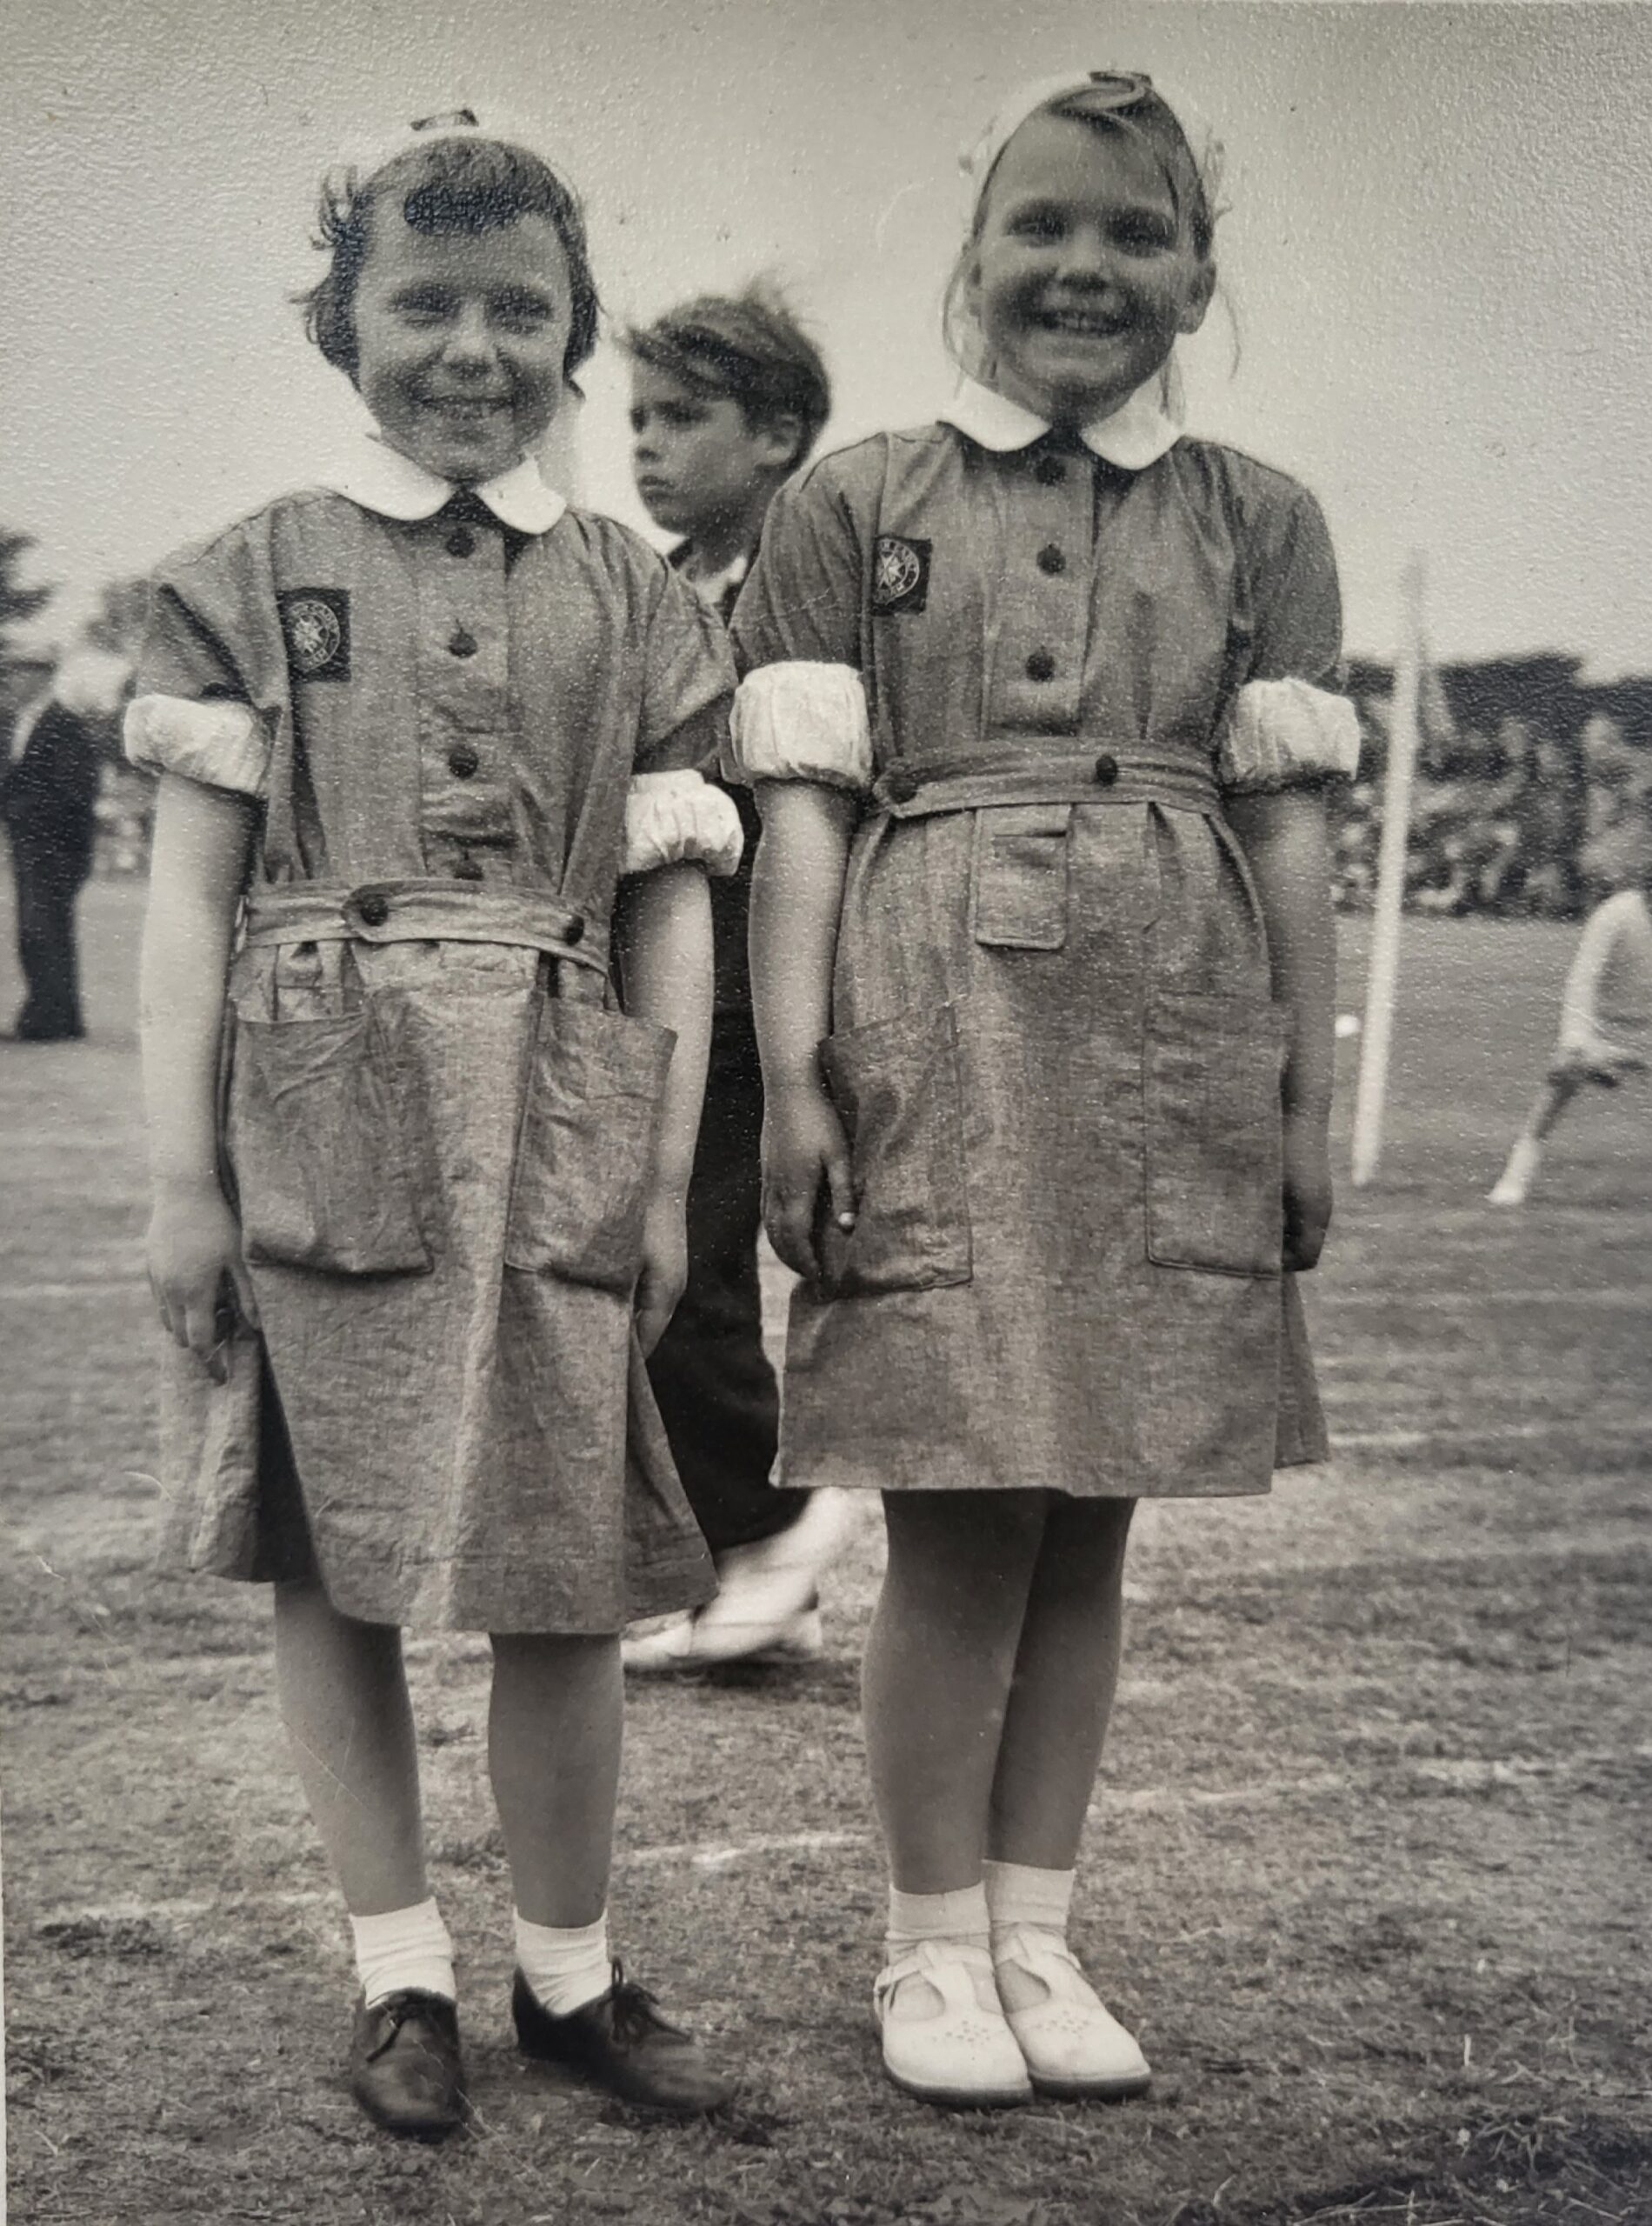 Black and white photograph of two young girl Cadets in uniform standing side by side on a playing field.